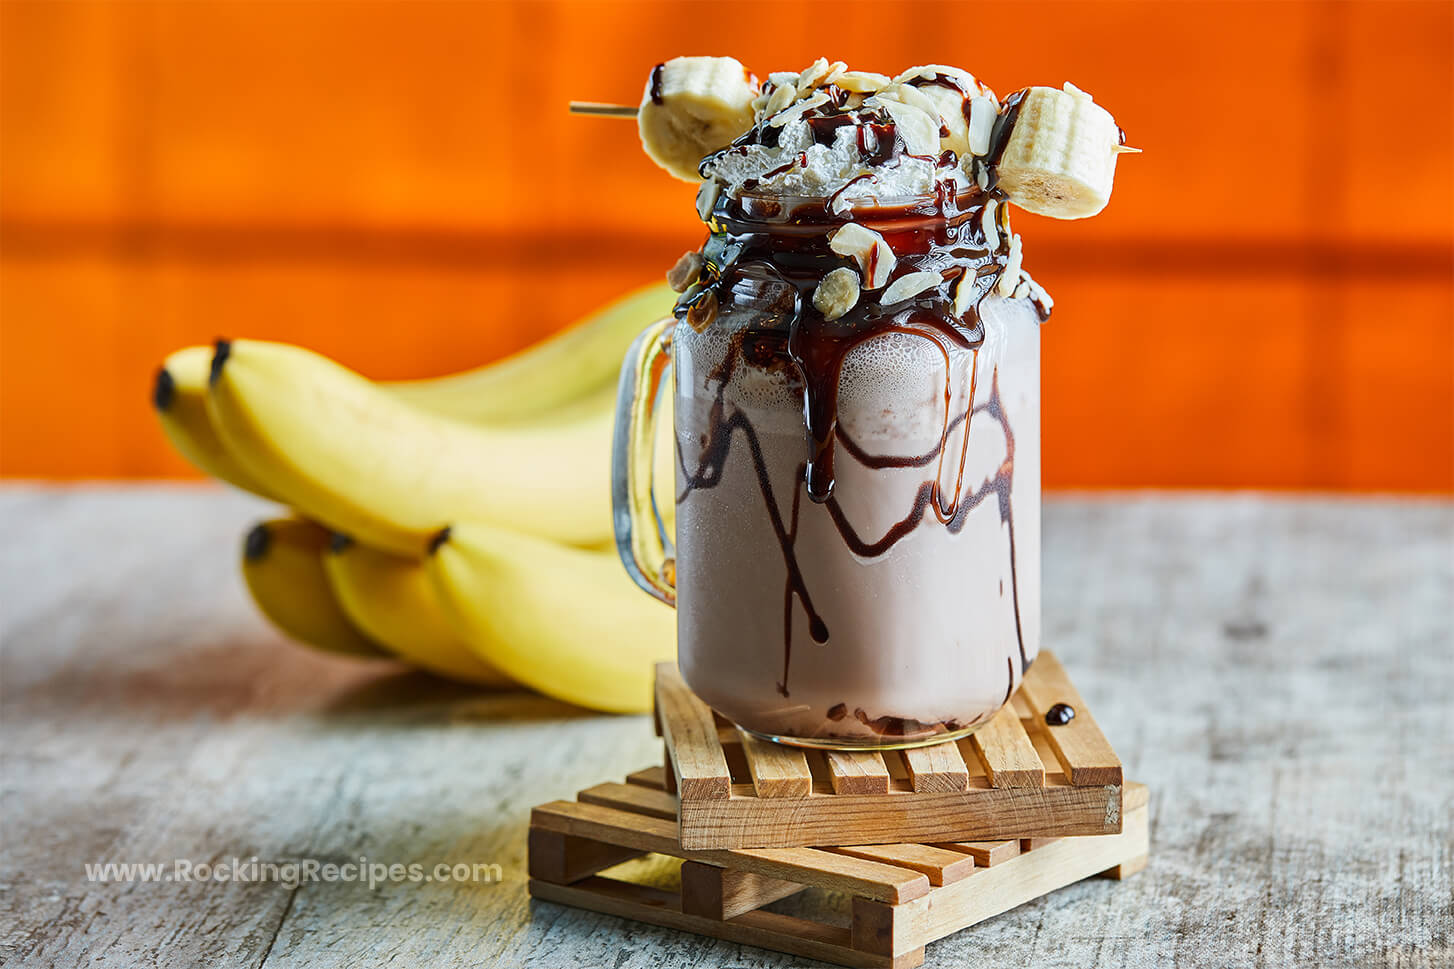 Chocolate and Peanut-Butter Banana Smoothie